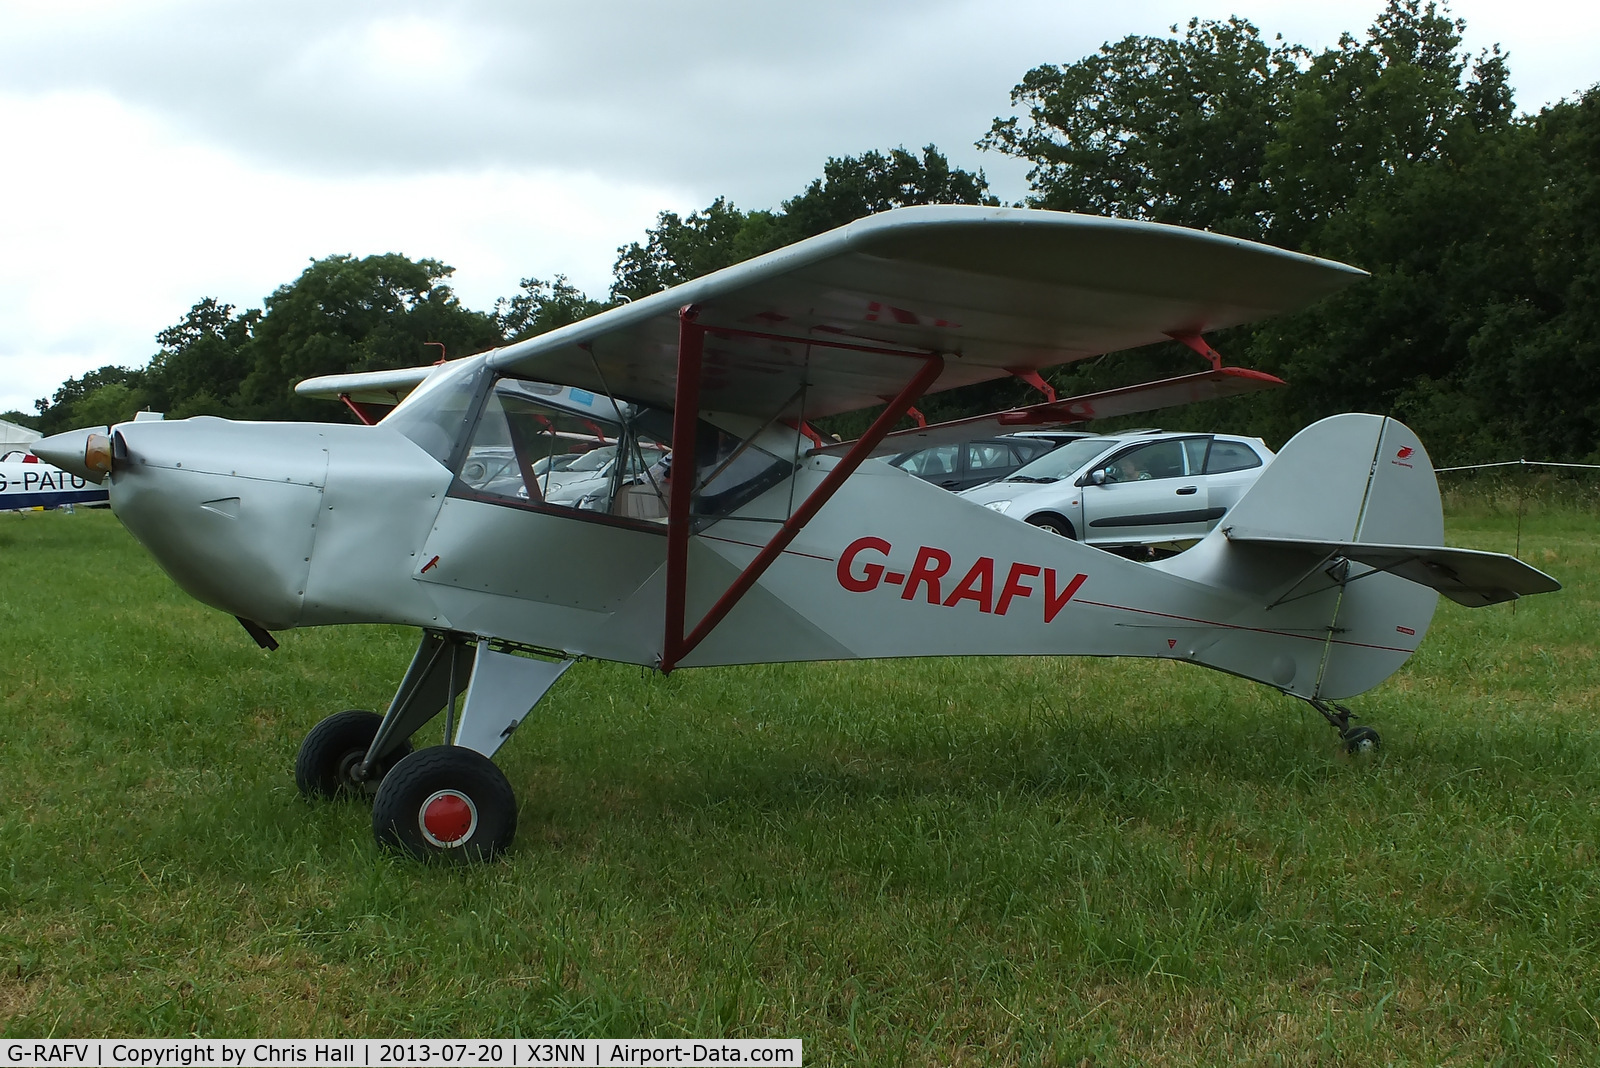 G-RAFV, 1992 Avid Speedwing C/N PFA 189-11738, at the Stoke Golding stakeout 2013